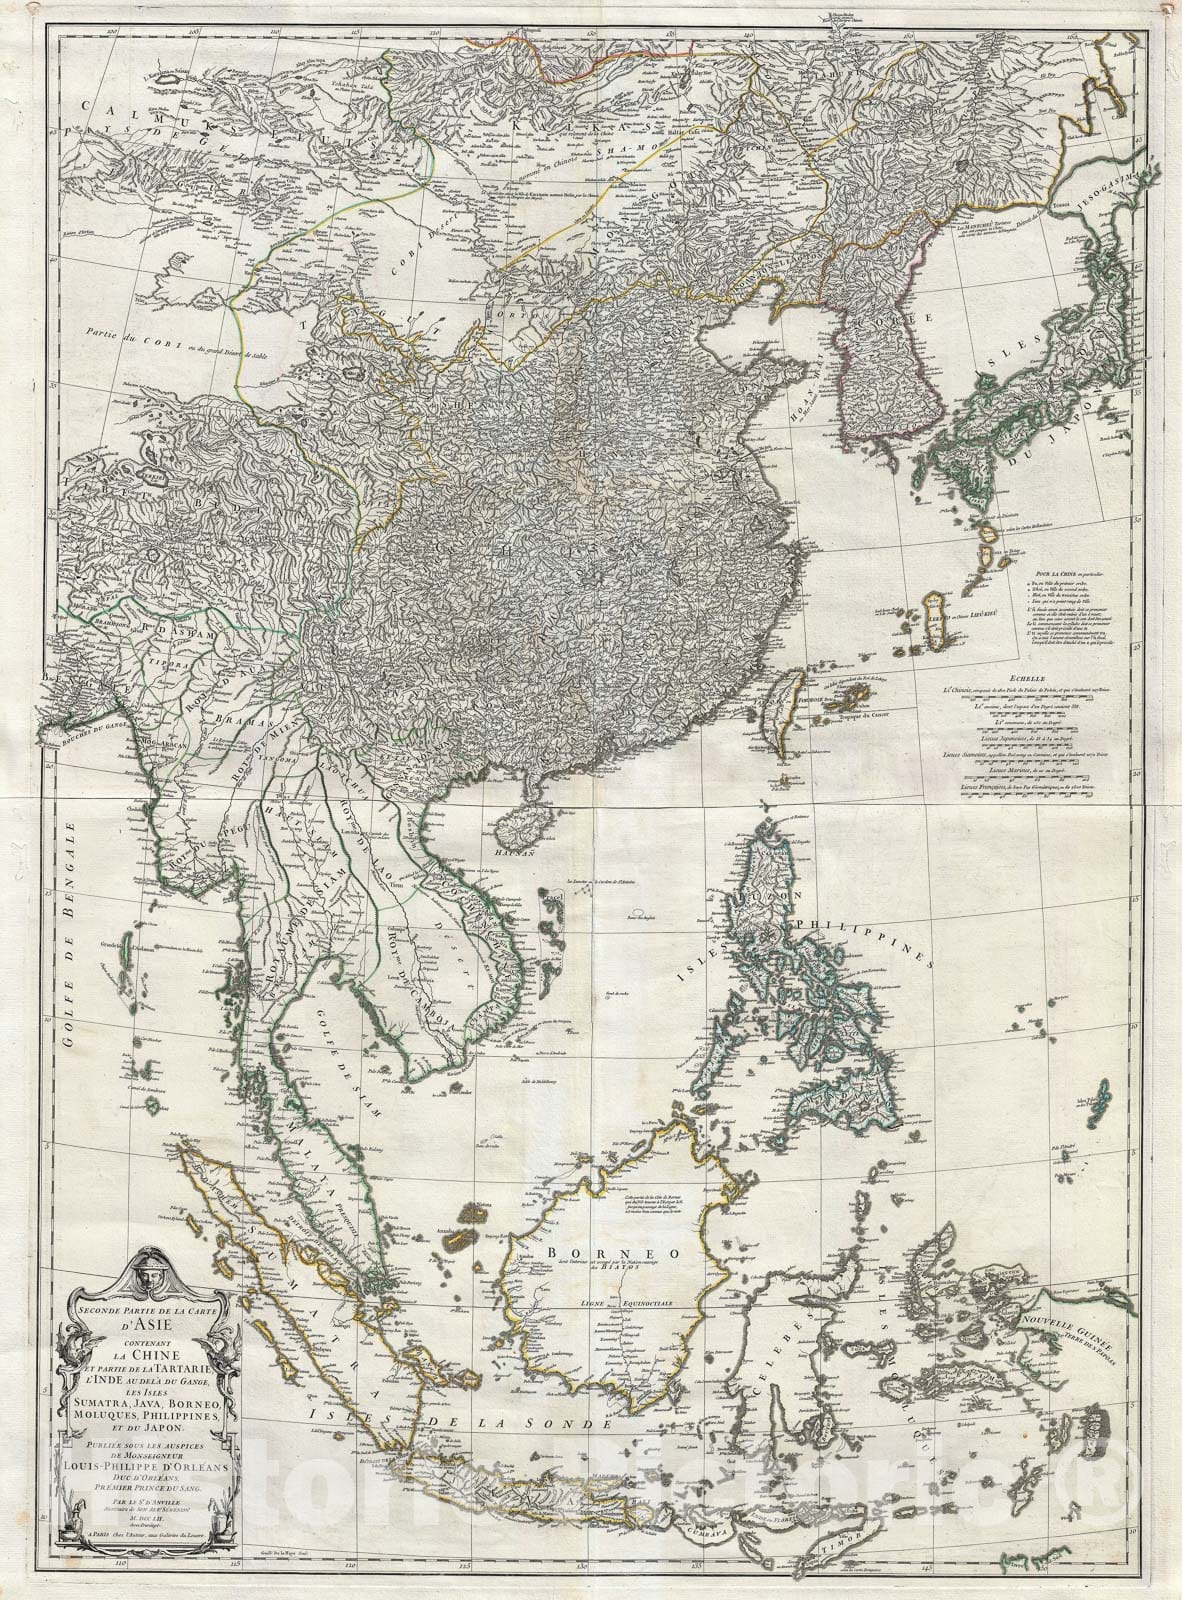 Historic Map : Southeast Asia, The East Indies, China, Korea and Japan, D'Anville, 1752, Vintage Wall Art